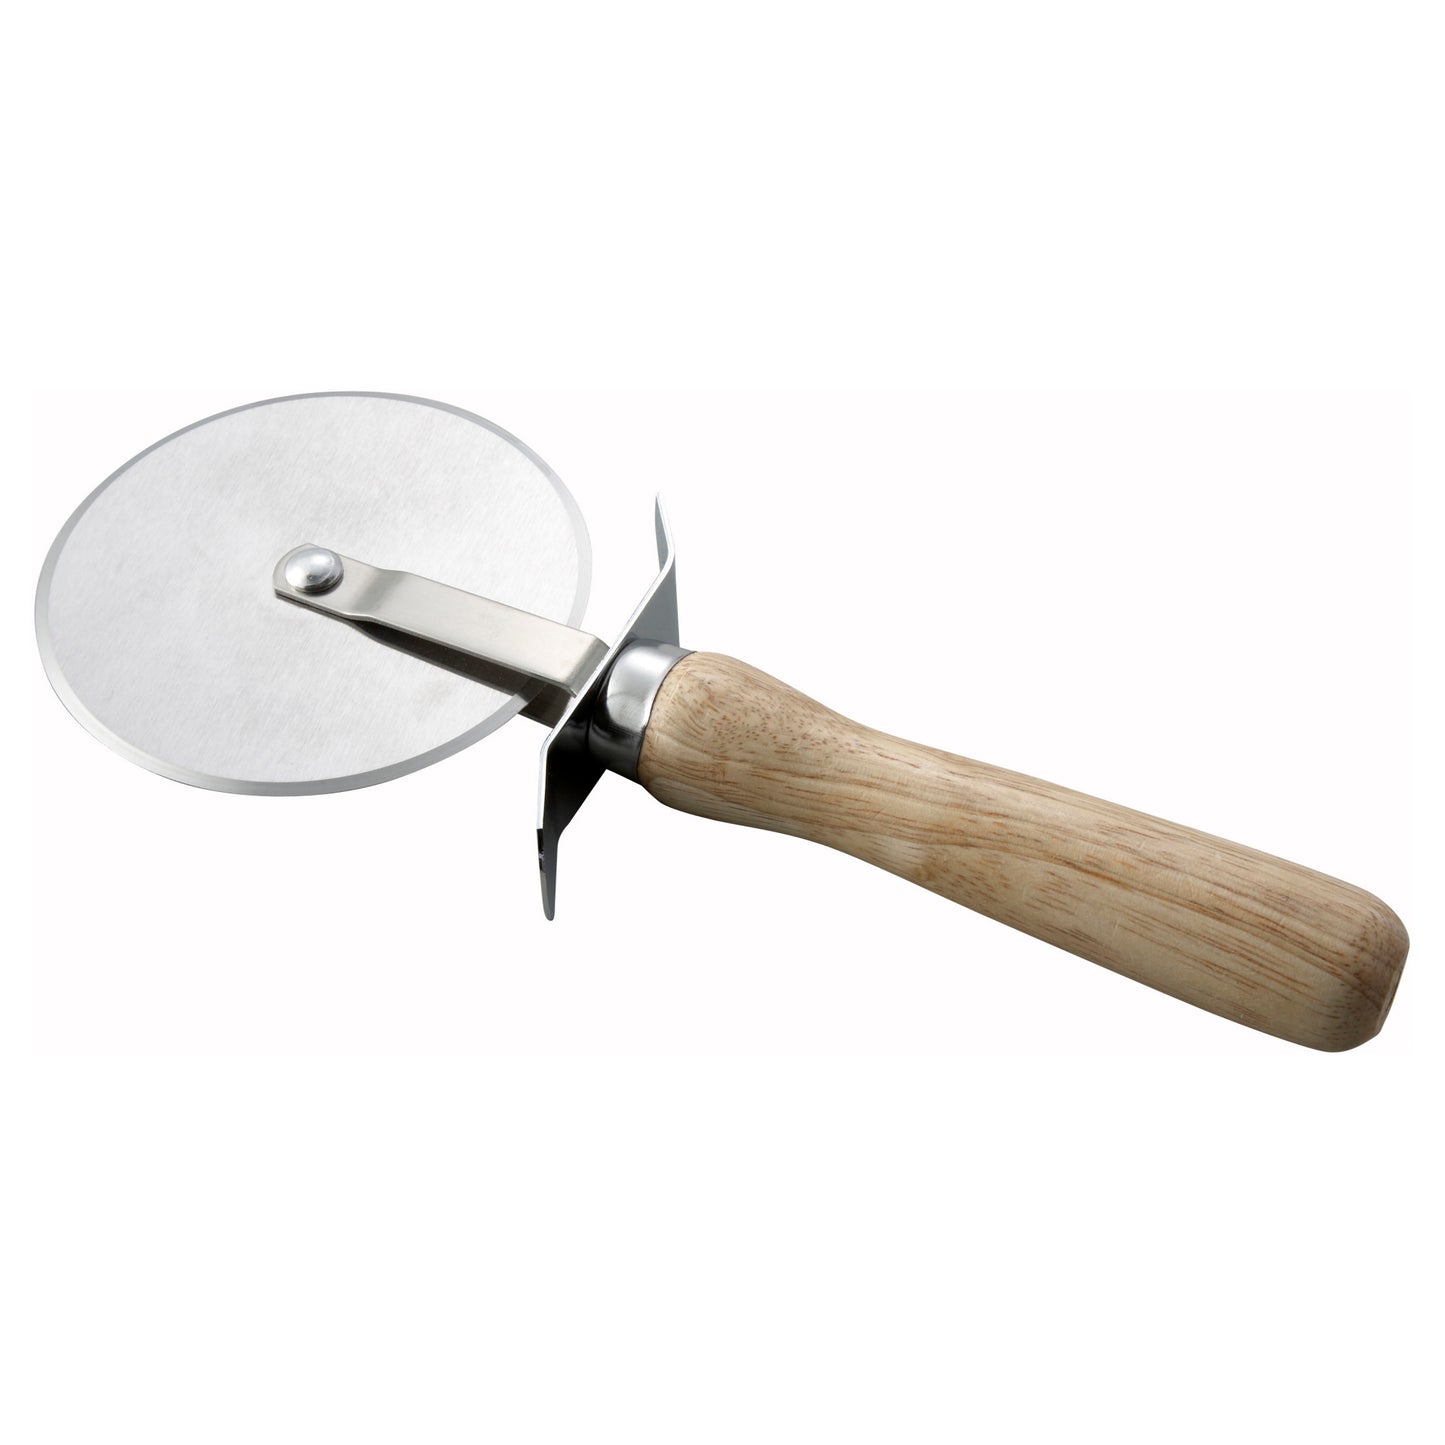 PWC-4 - 4" Pizza Cutter with Wooden Handle